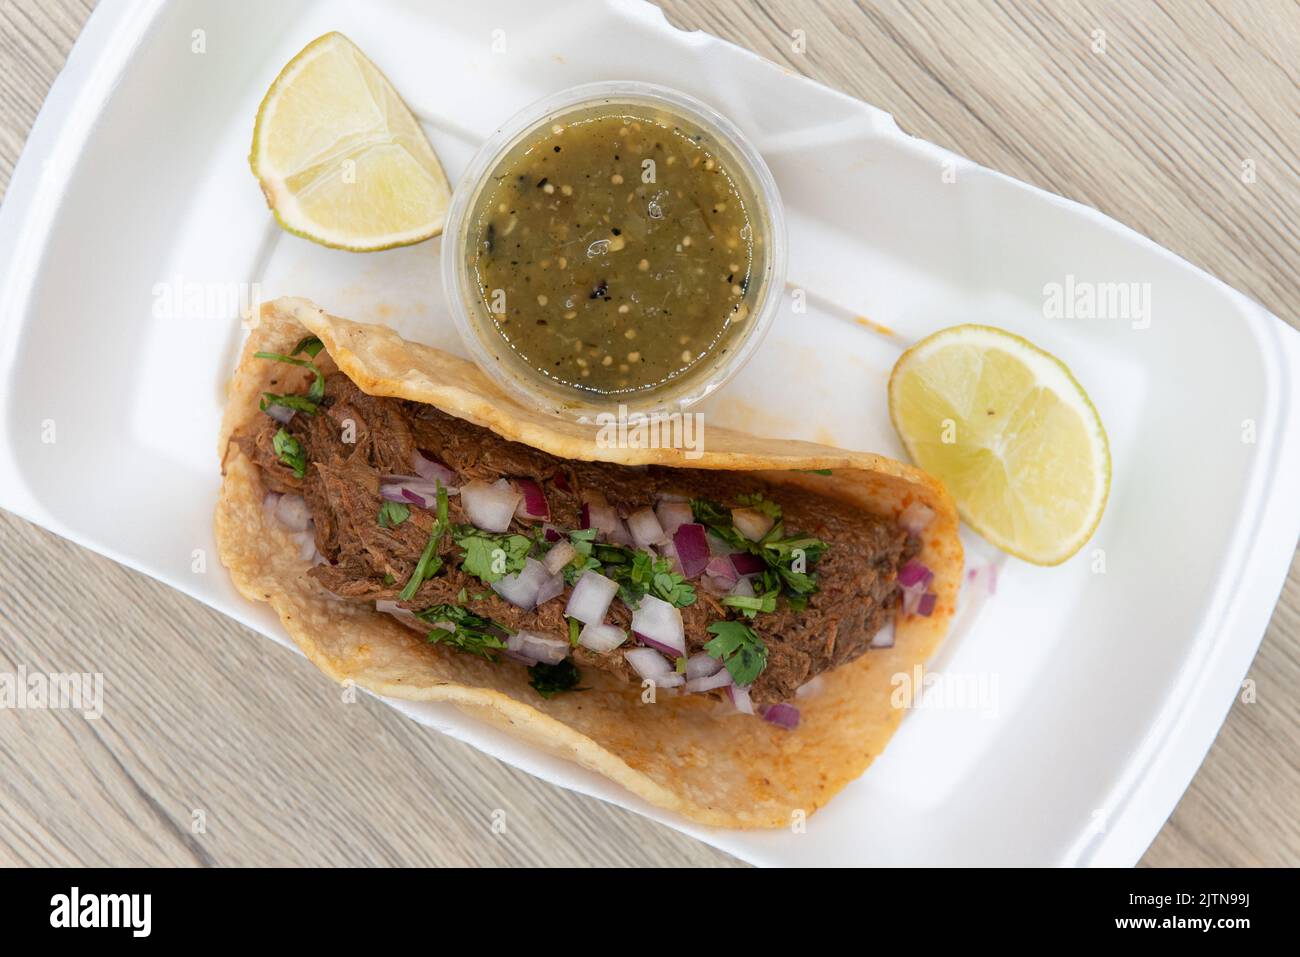 Overhead view of single birria taco completely fills the tortilla shell and served with salsa and limes as an appetizer. Stock Photo